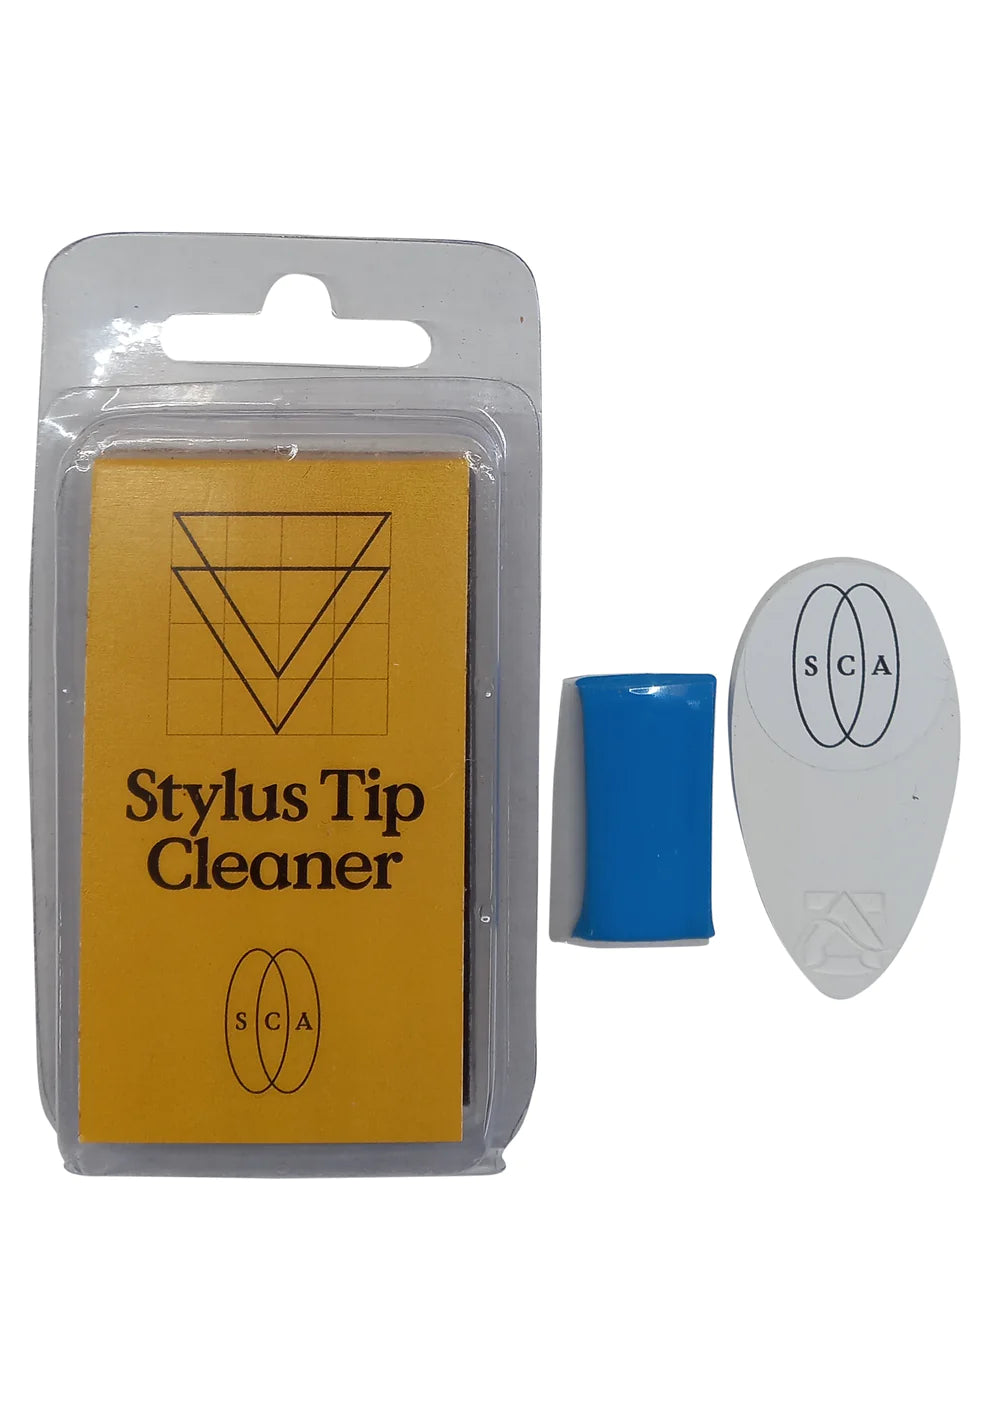 How good is the SCA Stylus Tip Cleaner (STC)?